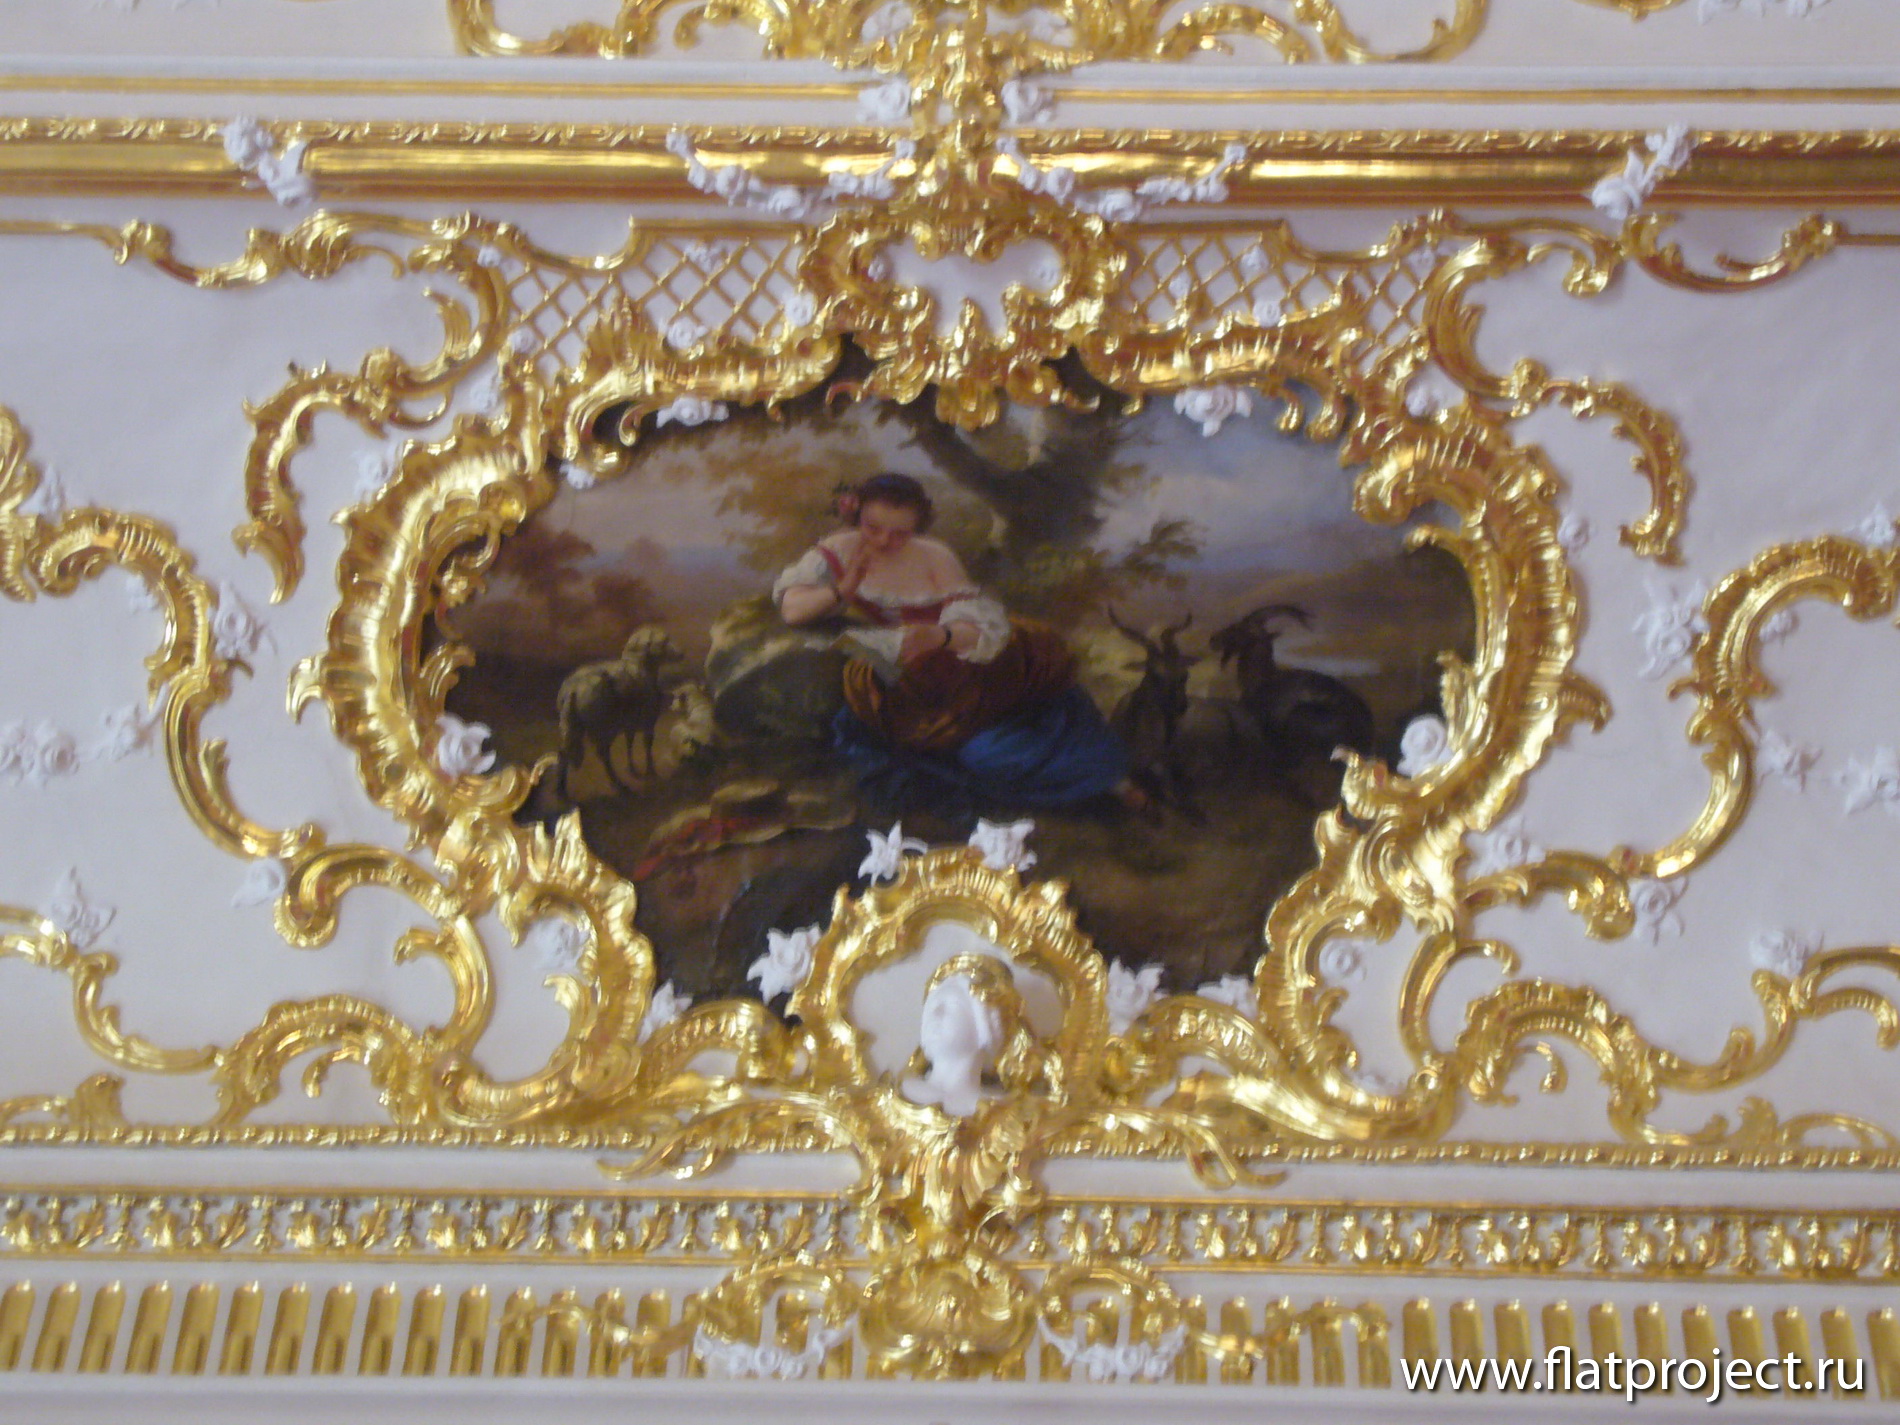 The State Russian museum interiors – photo 45